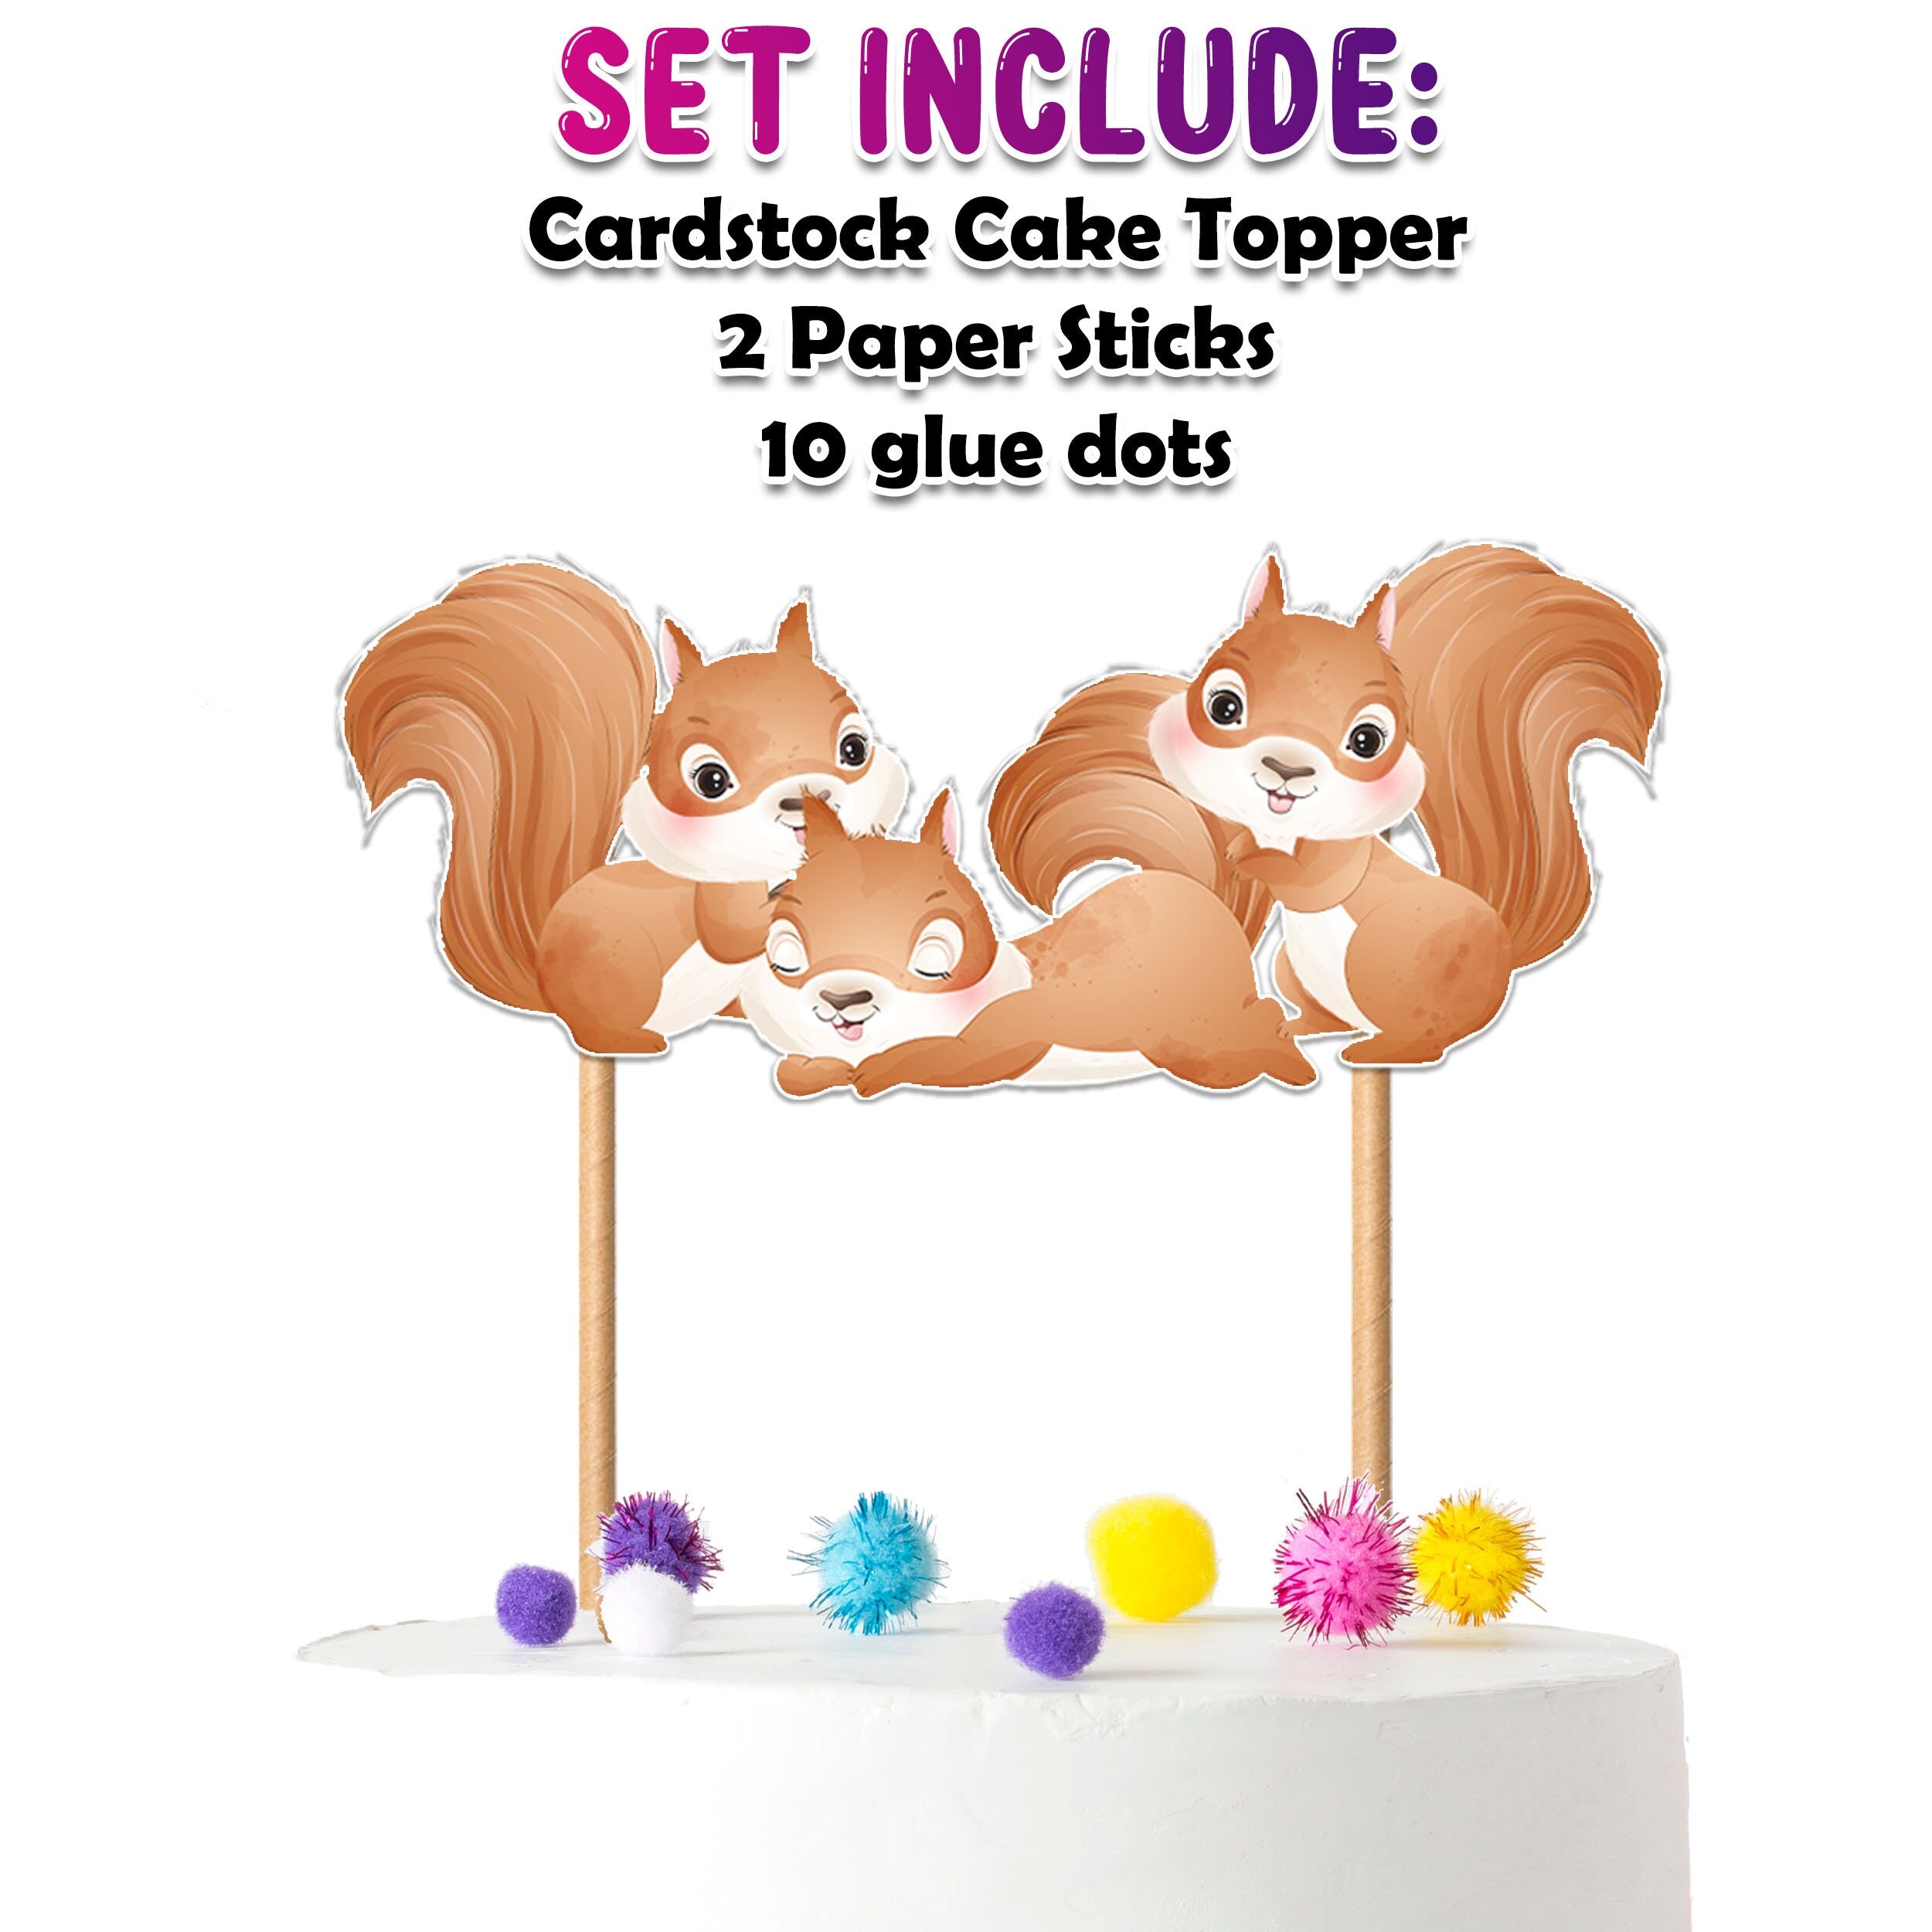 Charming Squirrel Cake Topper – Perfect for Baby Showers and Birthday Celebrations